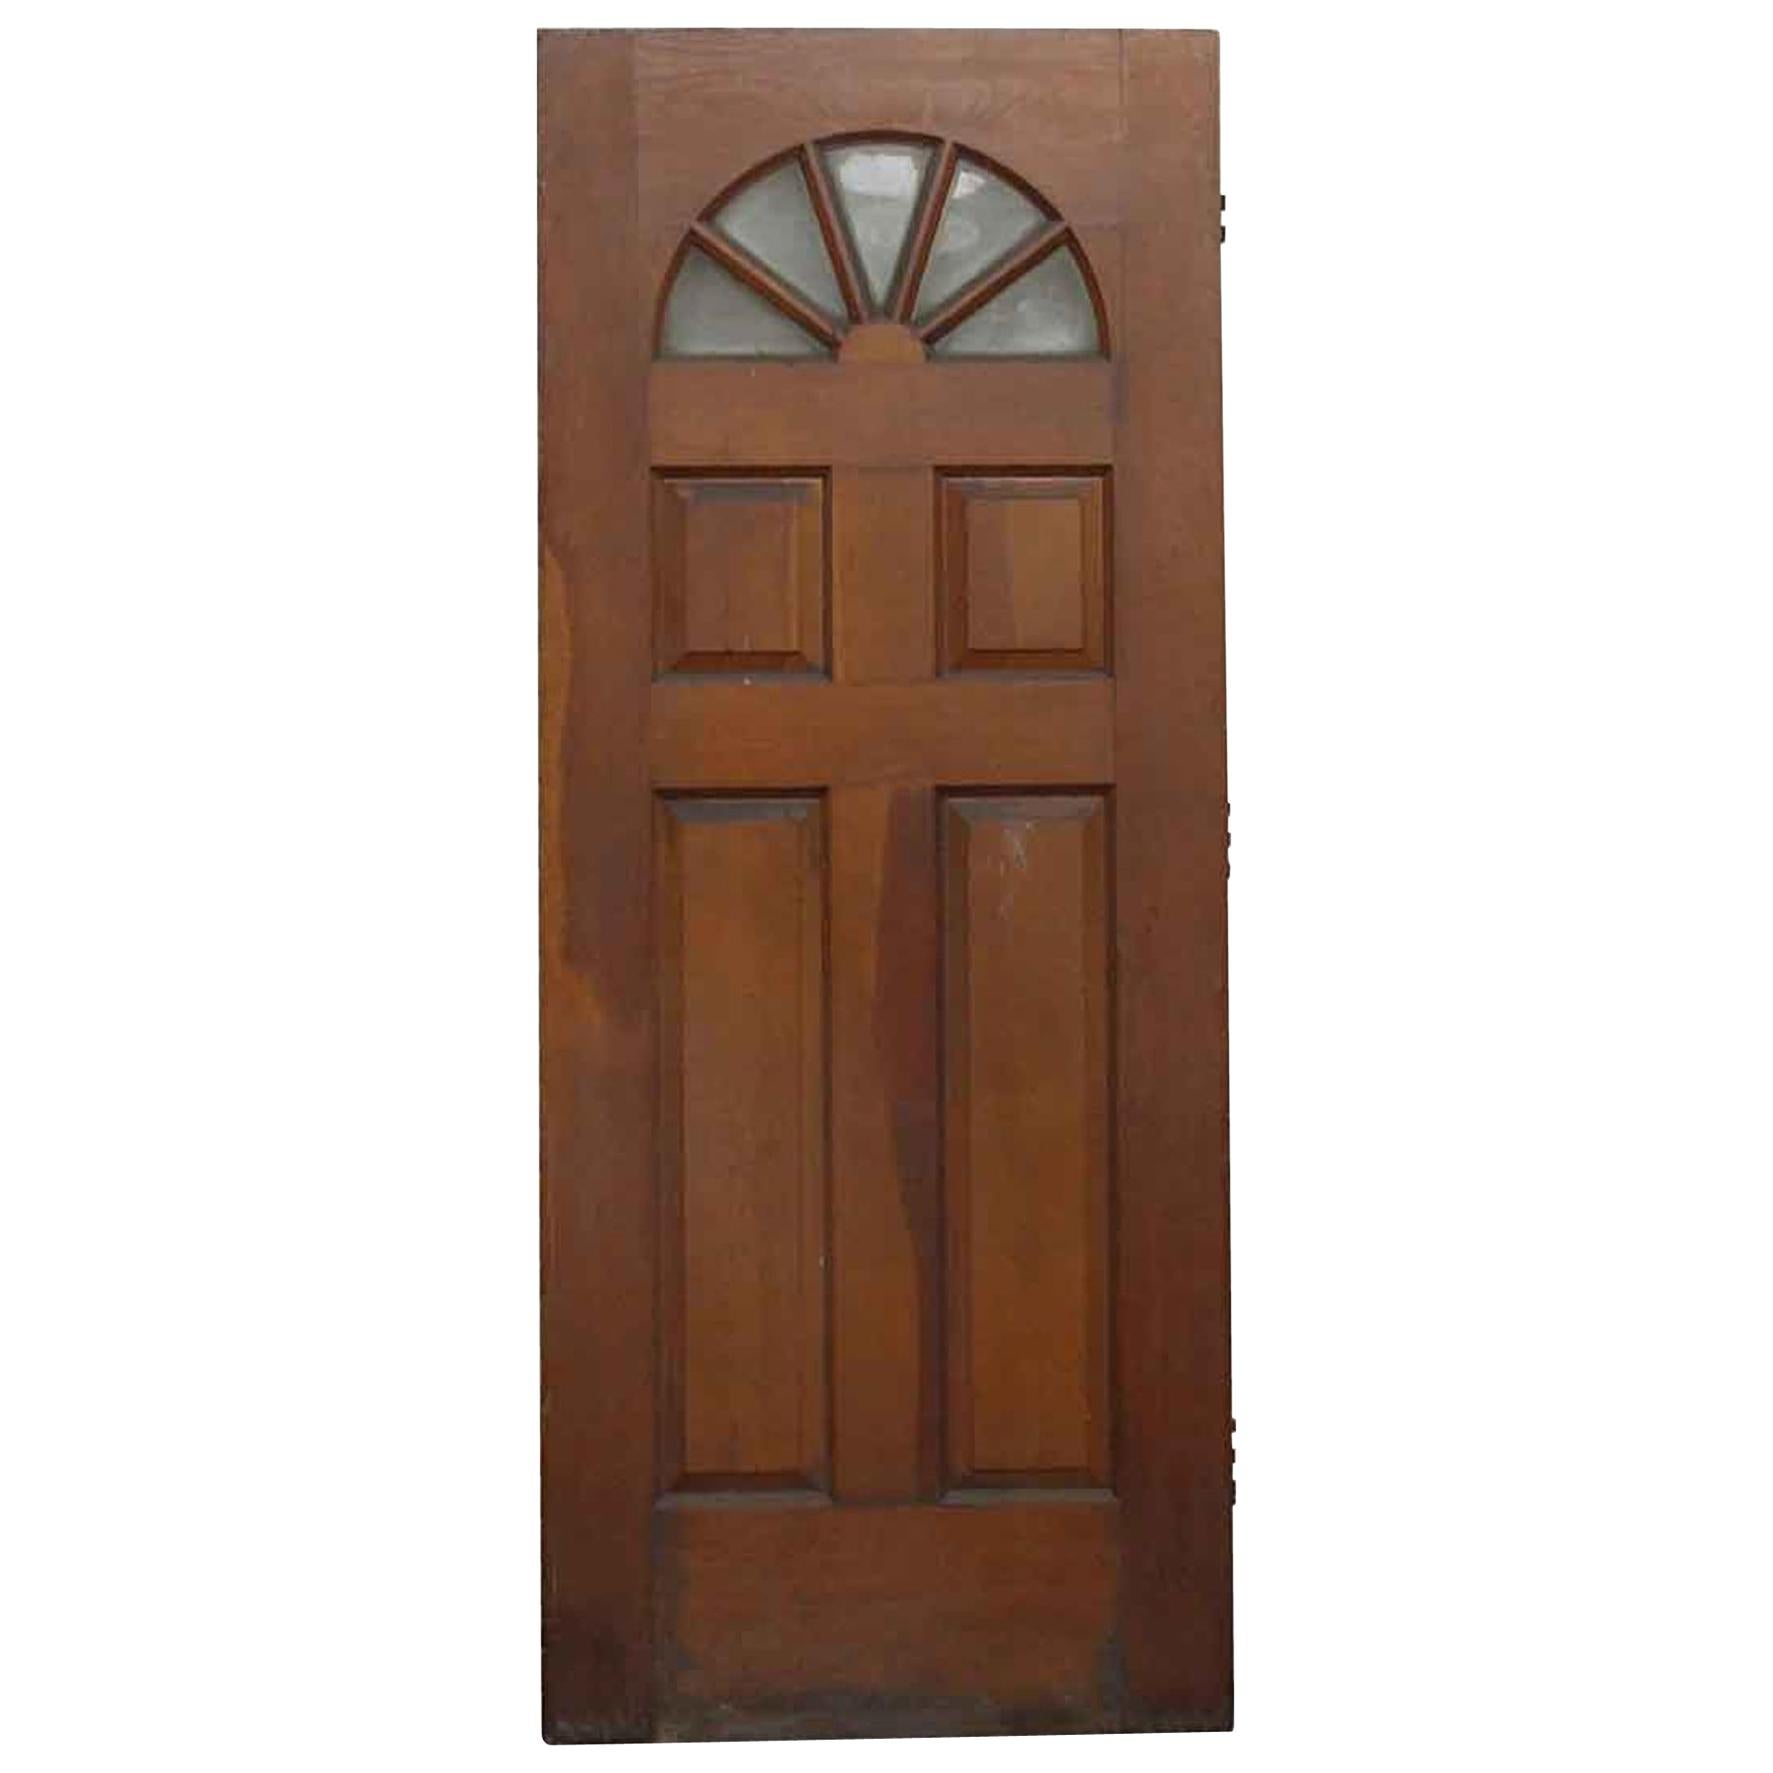 1930s Medium Tone Entry Door with Fan Shaped Glass Panes